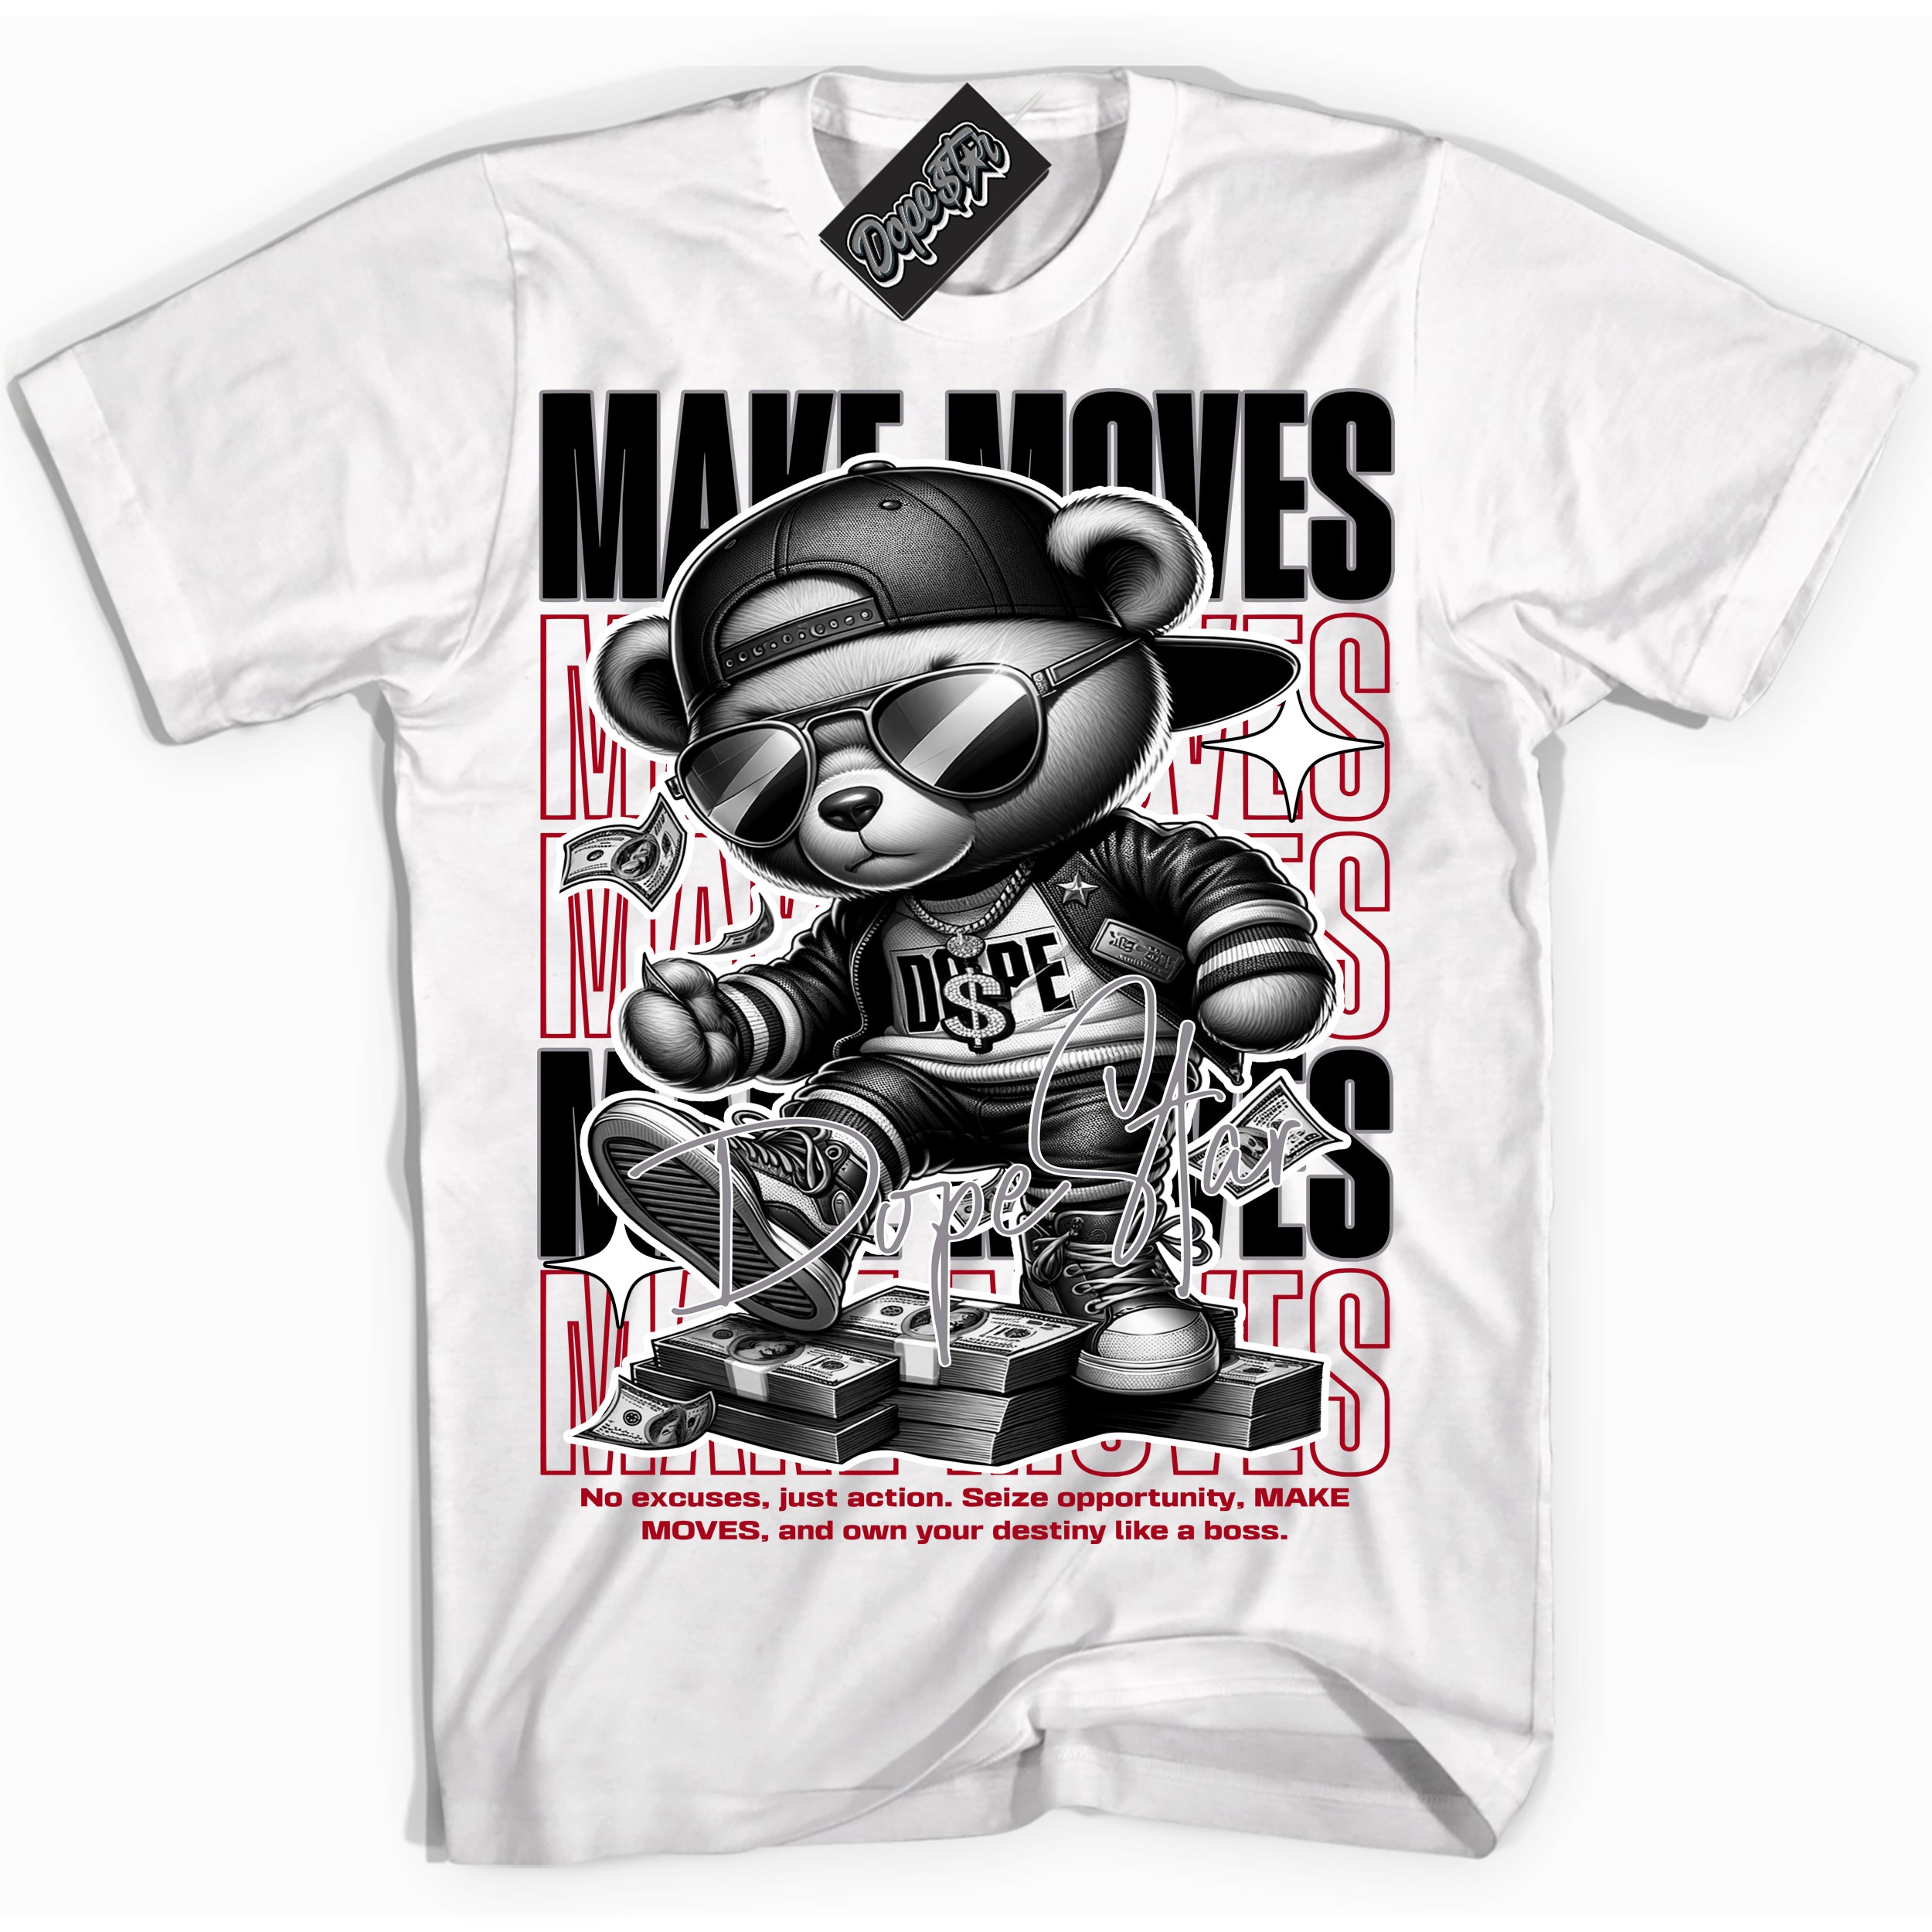 Cool White Shirt with “ Makin Moves” design that perfectly matches Bred Reimagined 4s Sneakers.